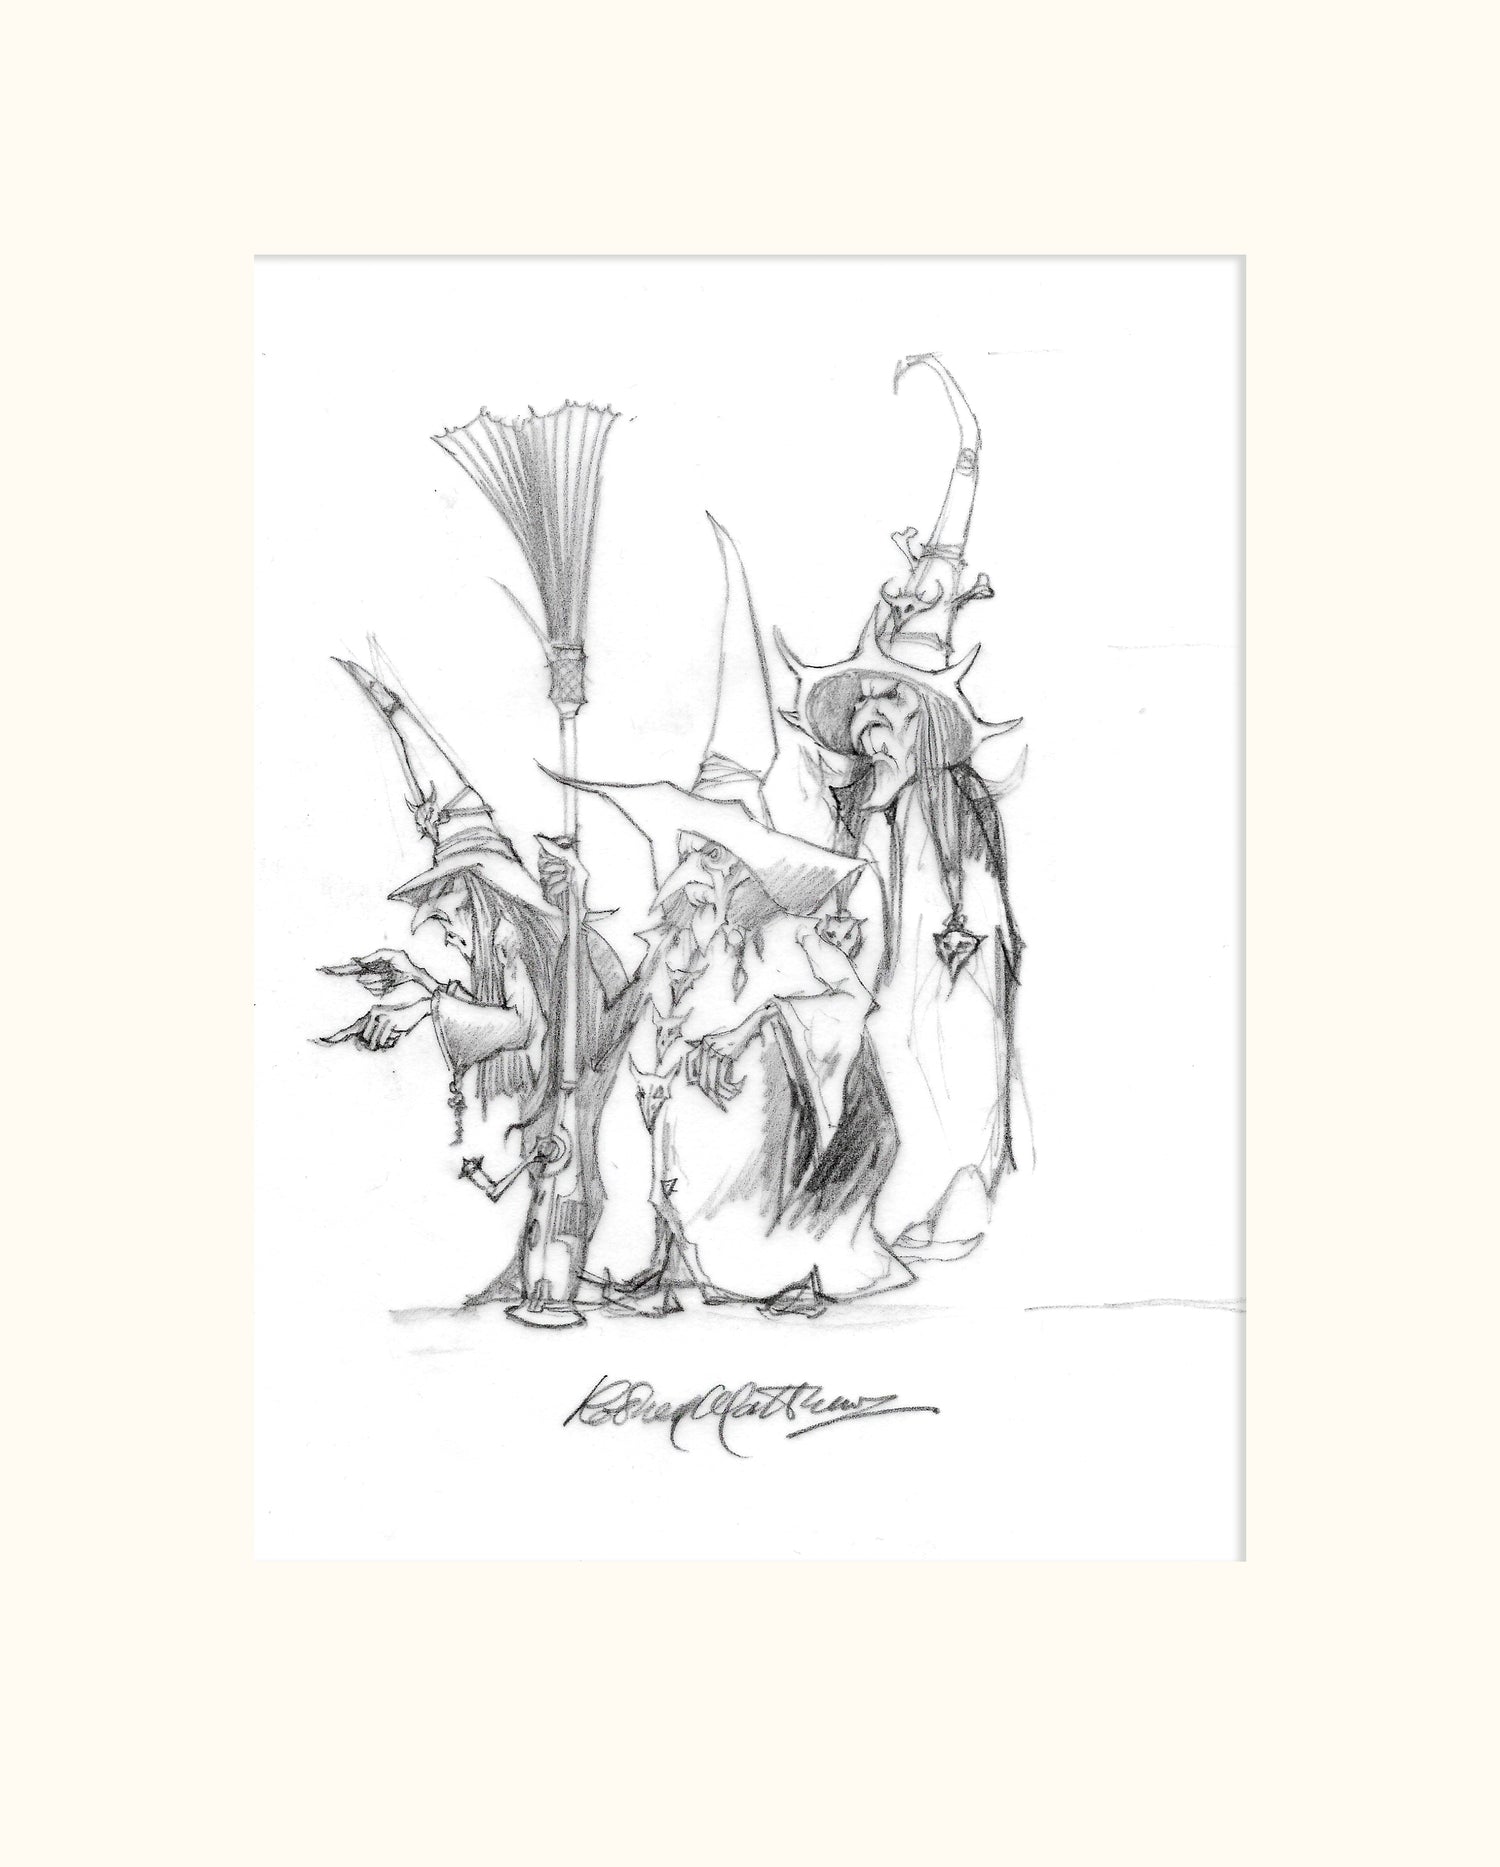 Detail from LOTRTE (Magnum) - The Three Witches original pencil sketch by Rodney Matthews